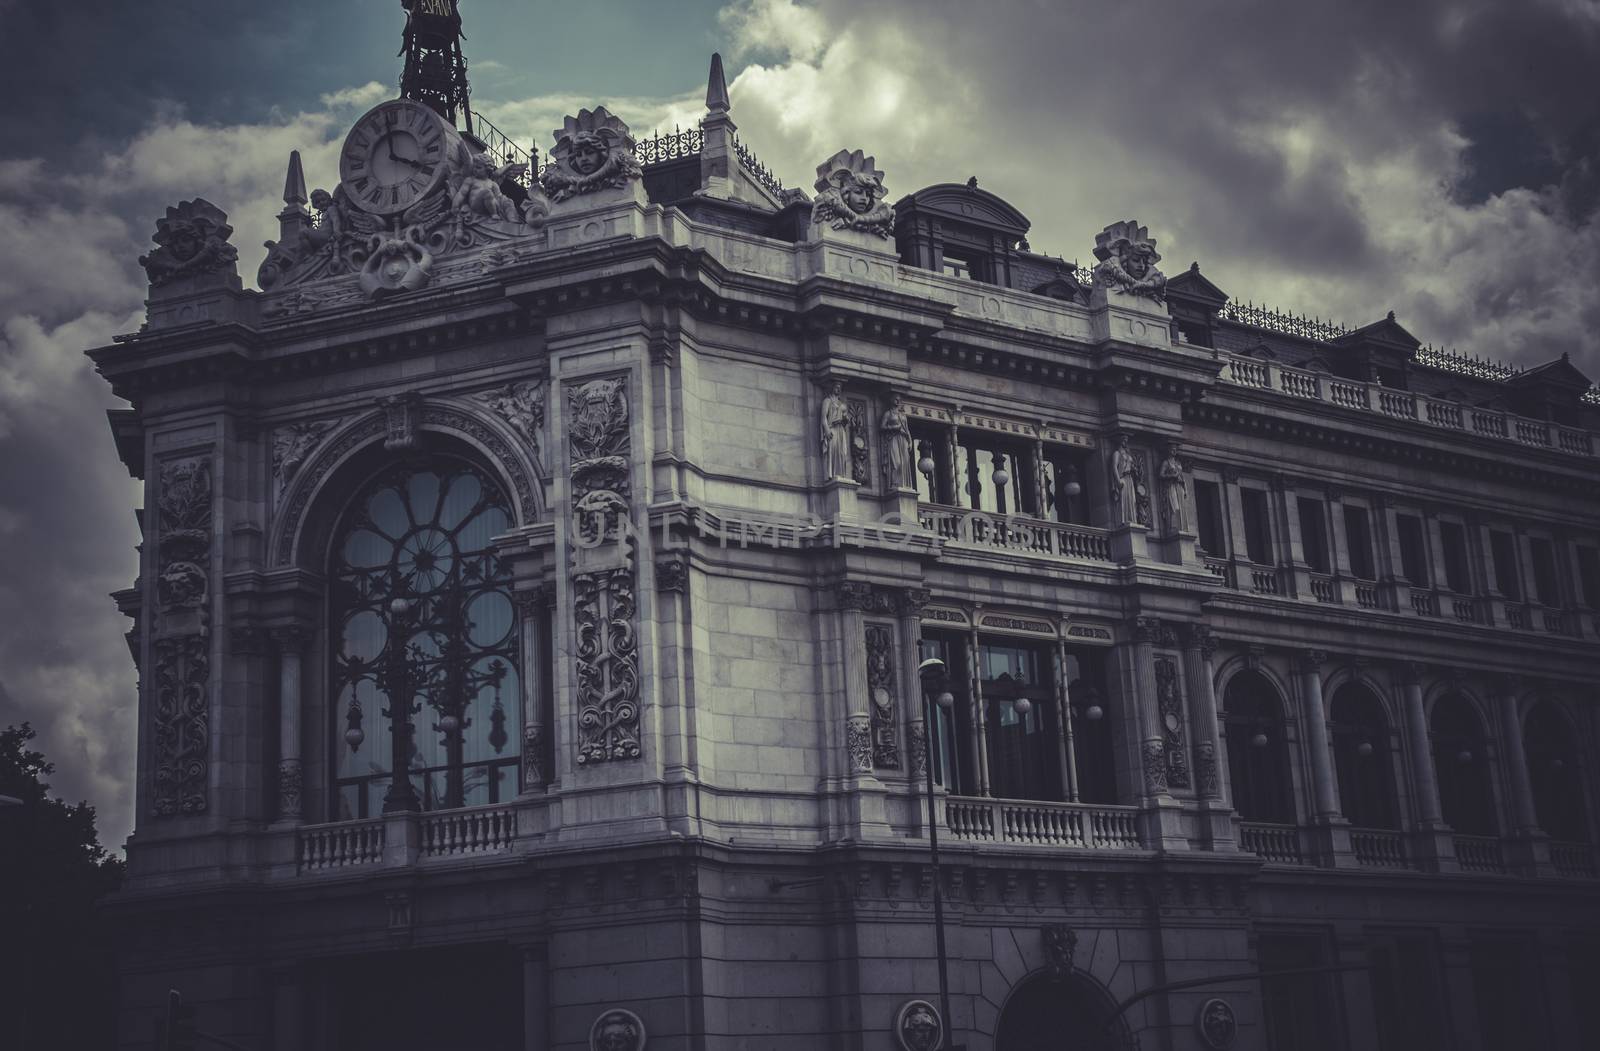 Banco de Espa��a, Image of the city of Madrid, its characteristi by FernandoCortes